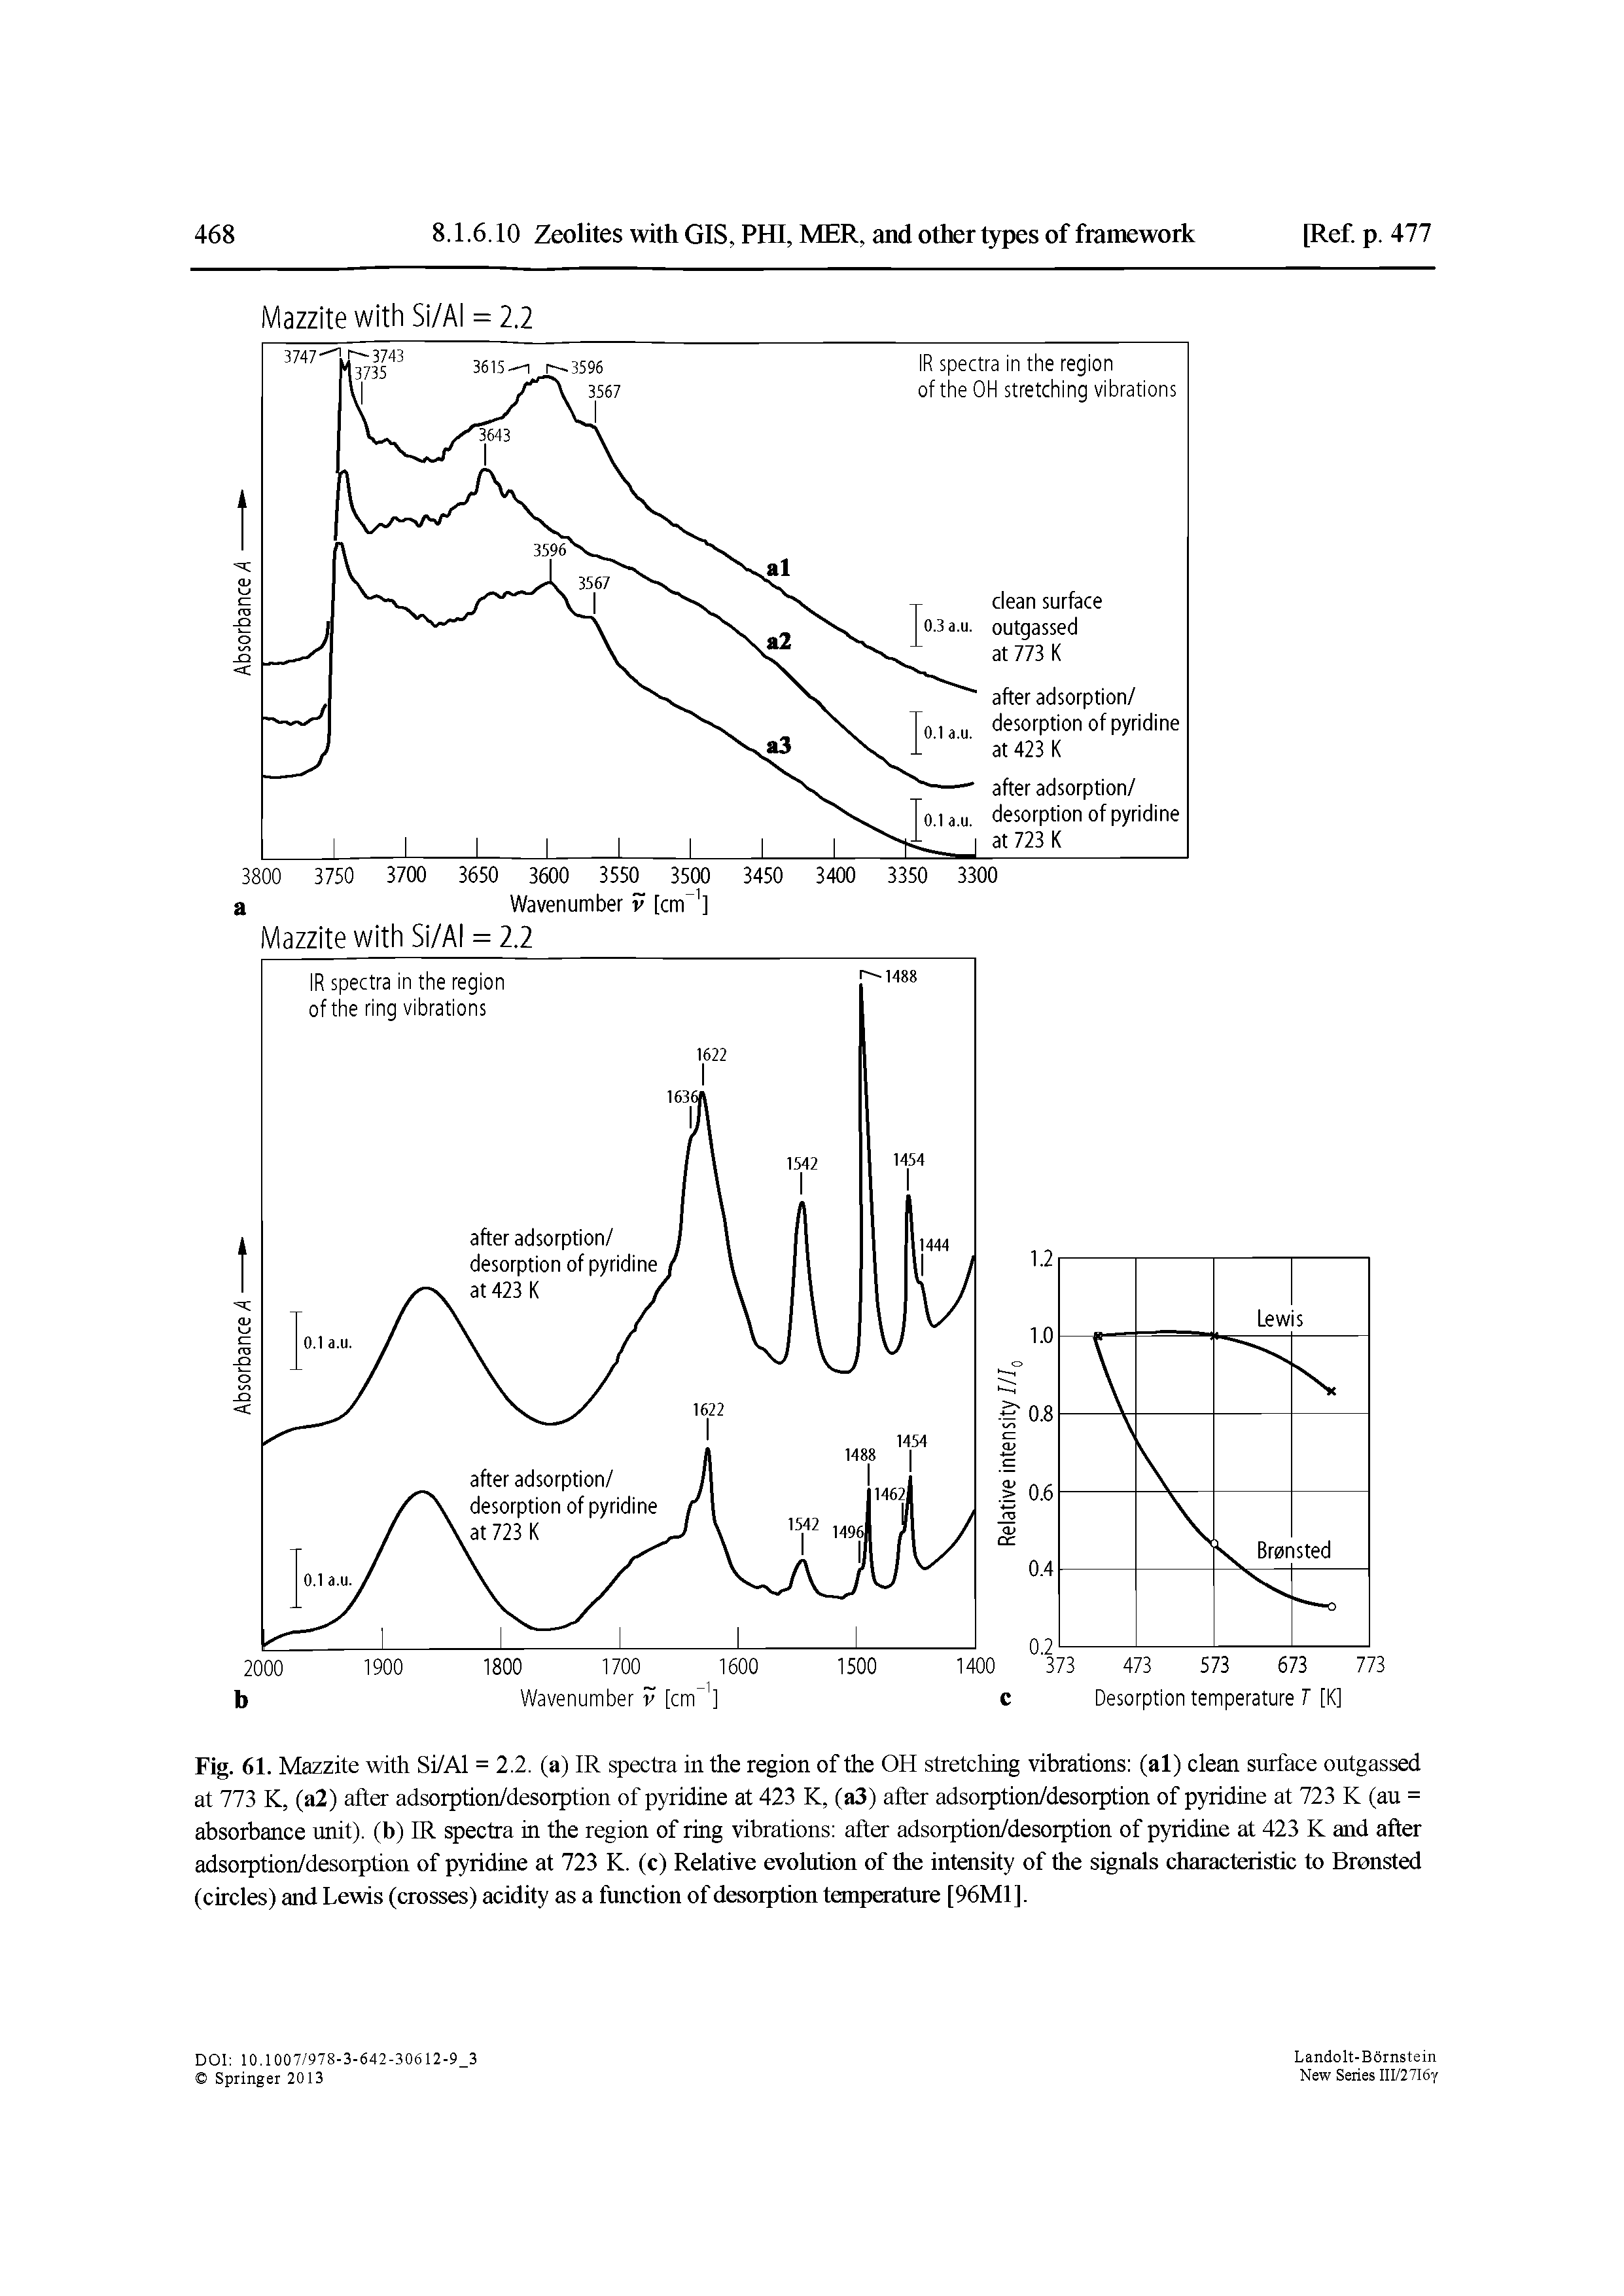 Fig. 61. Mazzite with Si/Al = 2.2. (a) IR spectra in the region of the OH stretching vibrations (al) clean surface outgassed at 773 K, (a2) after adsorption/desorption of pyridine at 423 K, (a3) after adsorption/desorption of pyridine at 723 K (au = absorbance unit), (b) IR spectra in the region of ring vibrations after adsorption/desorption of pyridine at 423 K and after adsorption/desorption of pyridine at 723 K. (c) Relative evolution of the intensity of the signals characteristic to Bronsted (circles) and Lewis (crosses) acidity as a function of desorption temperature [96M1].